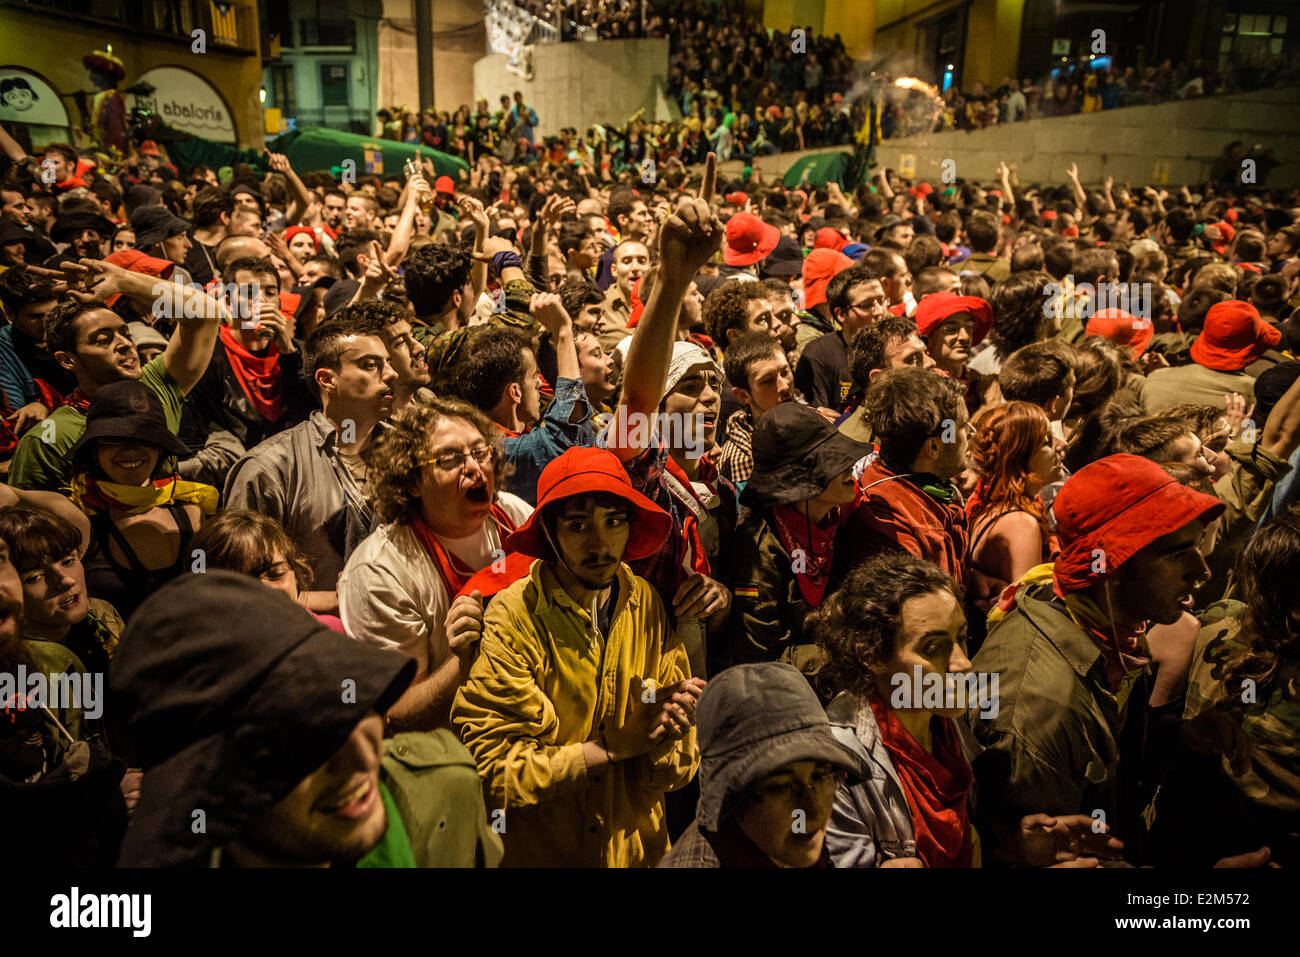 Berga, Spain. June 19th, 2014: Thousands of people dance hilarious on Berga's St. Pere's Place at the first complete Patum 2014 Credit:  matthi/Alamy Live News Stock Photo